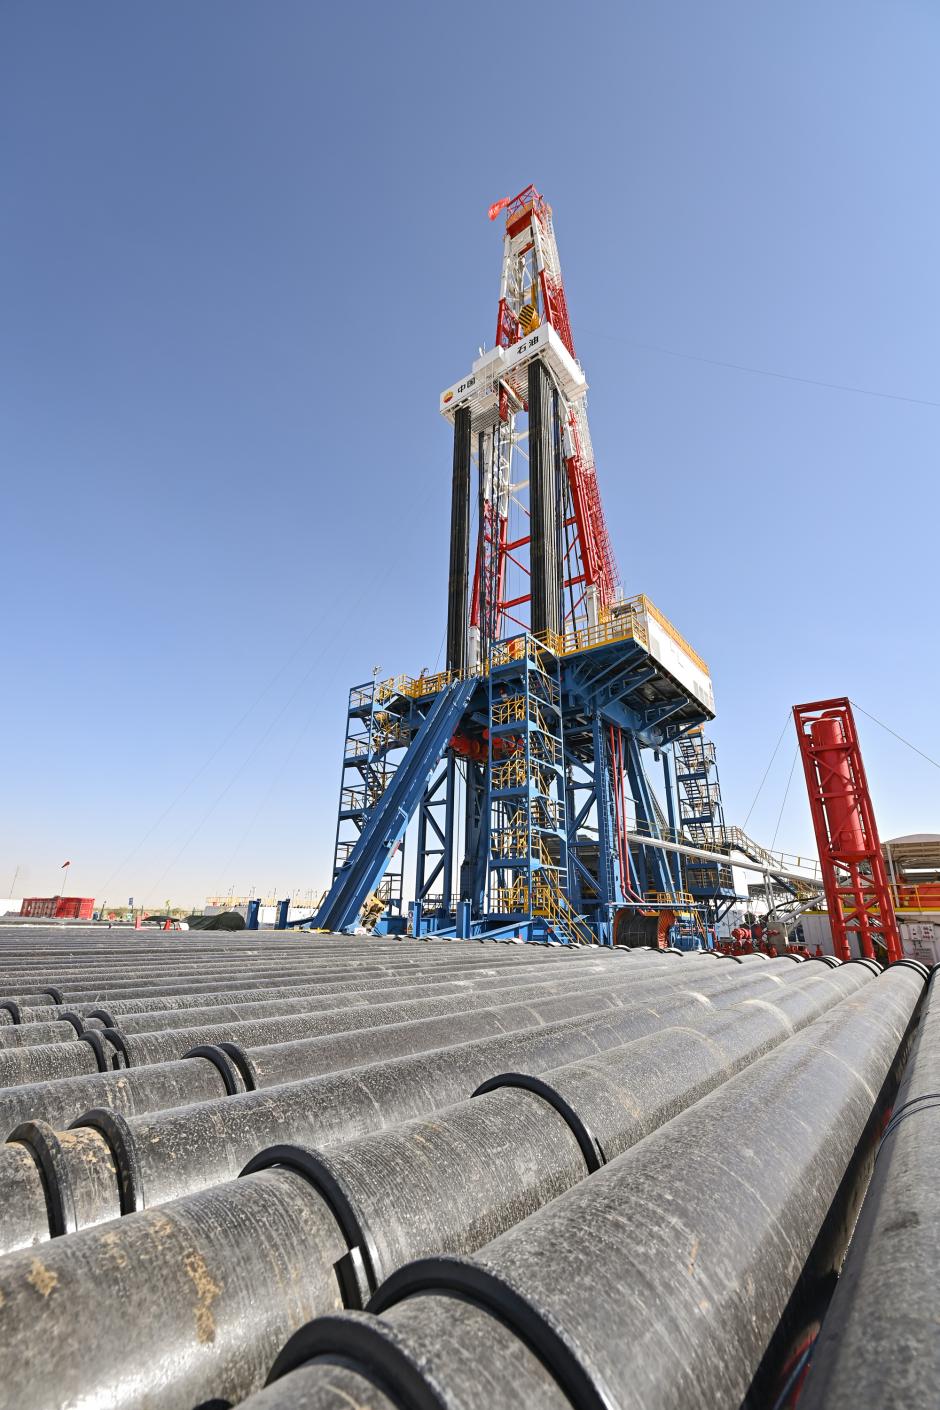 (230530) -- URUMQI, May 30, 2023 (Xinhua) -- Engineers inspect the operation of drilling machine at the drilling project of a borehole over 10,000 meters deep for scientific exploration in northwest China's Xinjiang Uygur Autonomous Region, May 30, 2023.
  The drilling of China's first borehole over 10,000 meters deep for scientific exploration began on Tuesday in the Tarim Basin, northwest China's Xinjiang Uygur Autonomous Region.
   The operation started at 11:46 a.m. on Tuesday. It represents a landmark in China's deep-Earth exploration, providing an unprecedented opportunity to study areas of the planet deep beneath the surface. (Xinhua/Li Xiang) (Photo by Li Xiang / XINHUA / Xinhua via AFP)